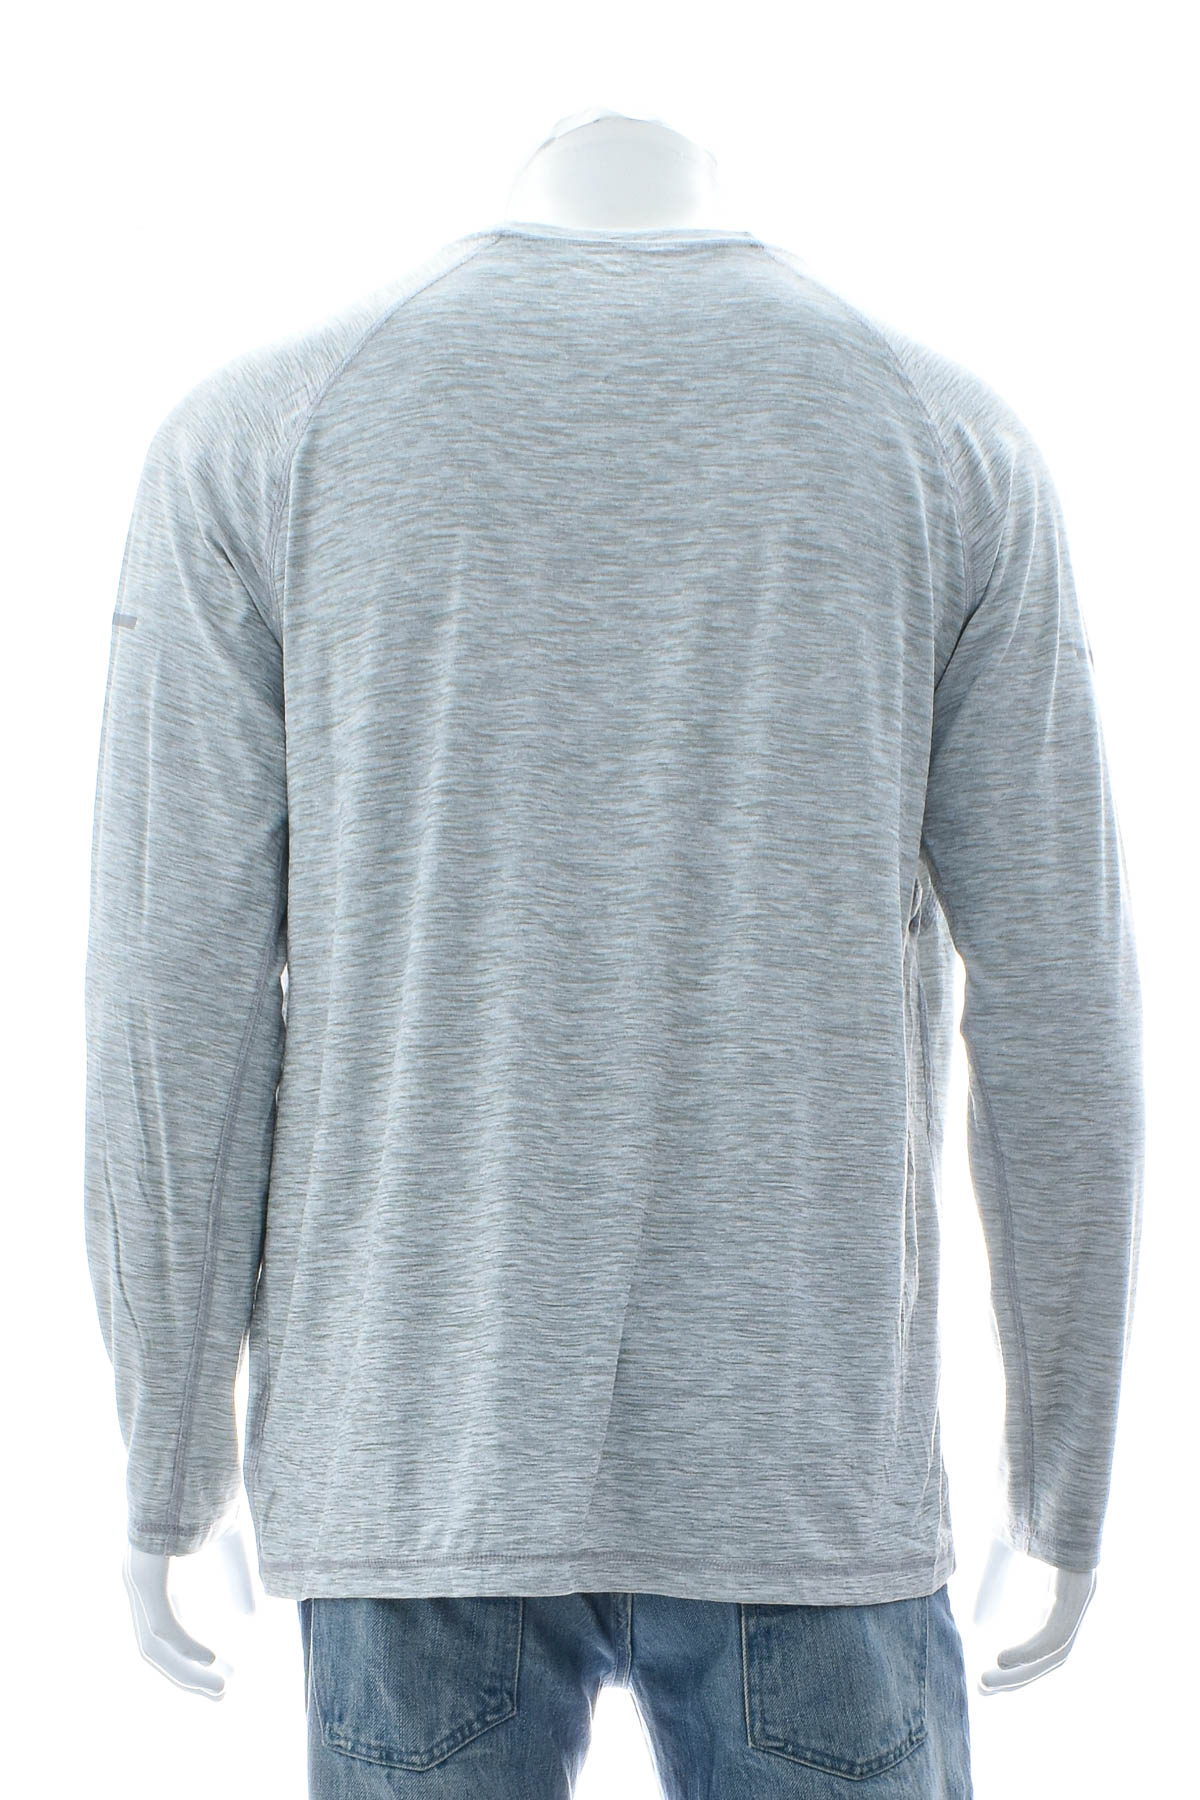 Men's blouse - OLD NAVY ACTIVE - 1